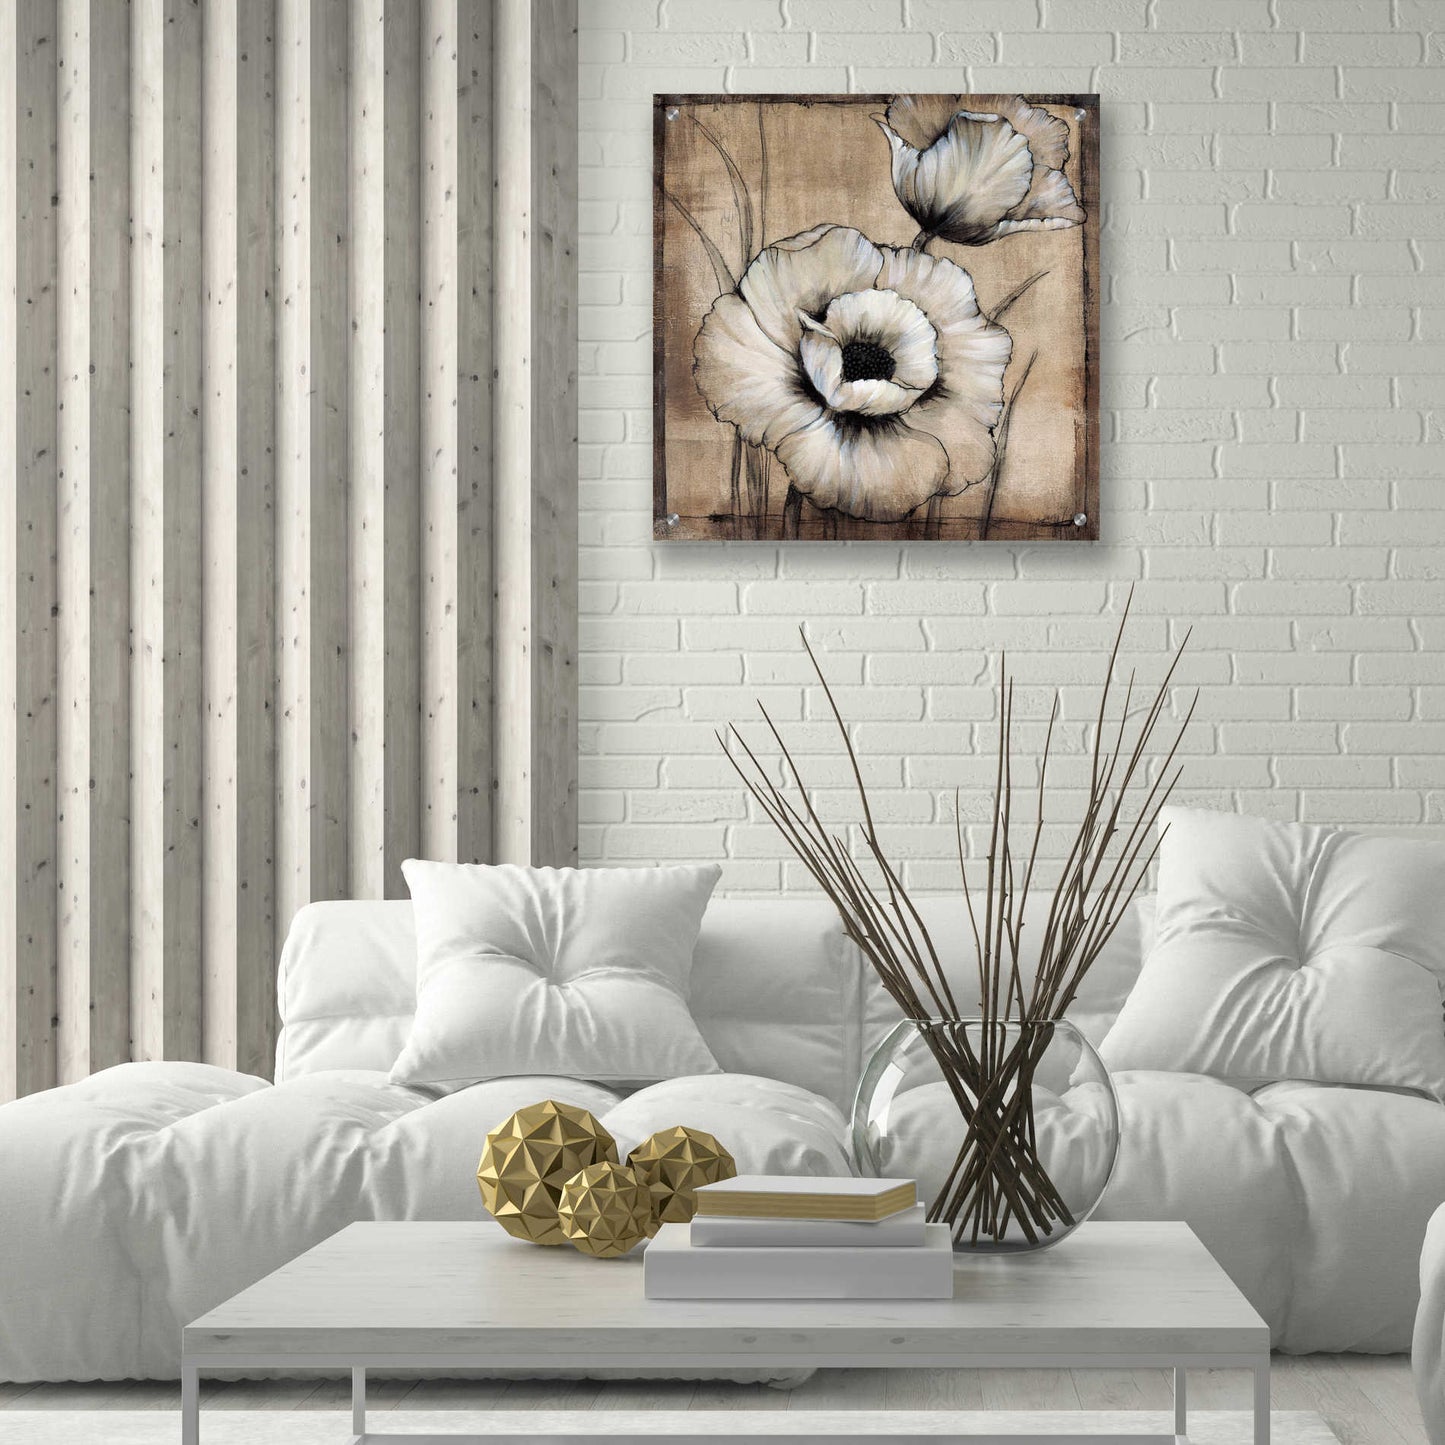 Epic Art 'Neutral Poppies I' by Tim O'Toole, Acrylic Glass Wall Art,24x24